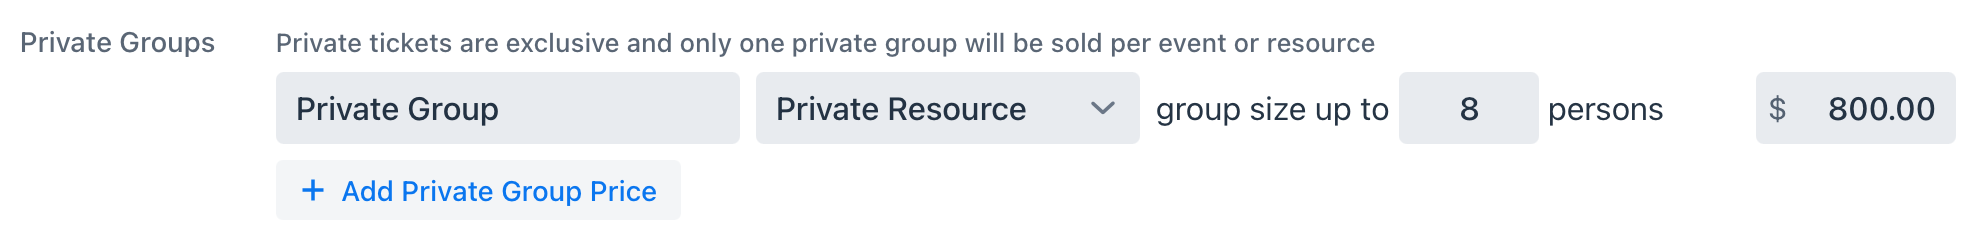 Private_Resource_-_Price_List.png